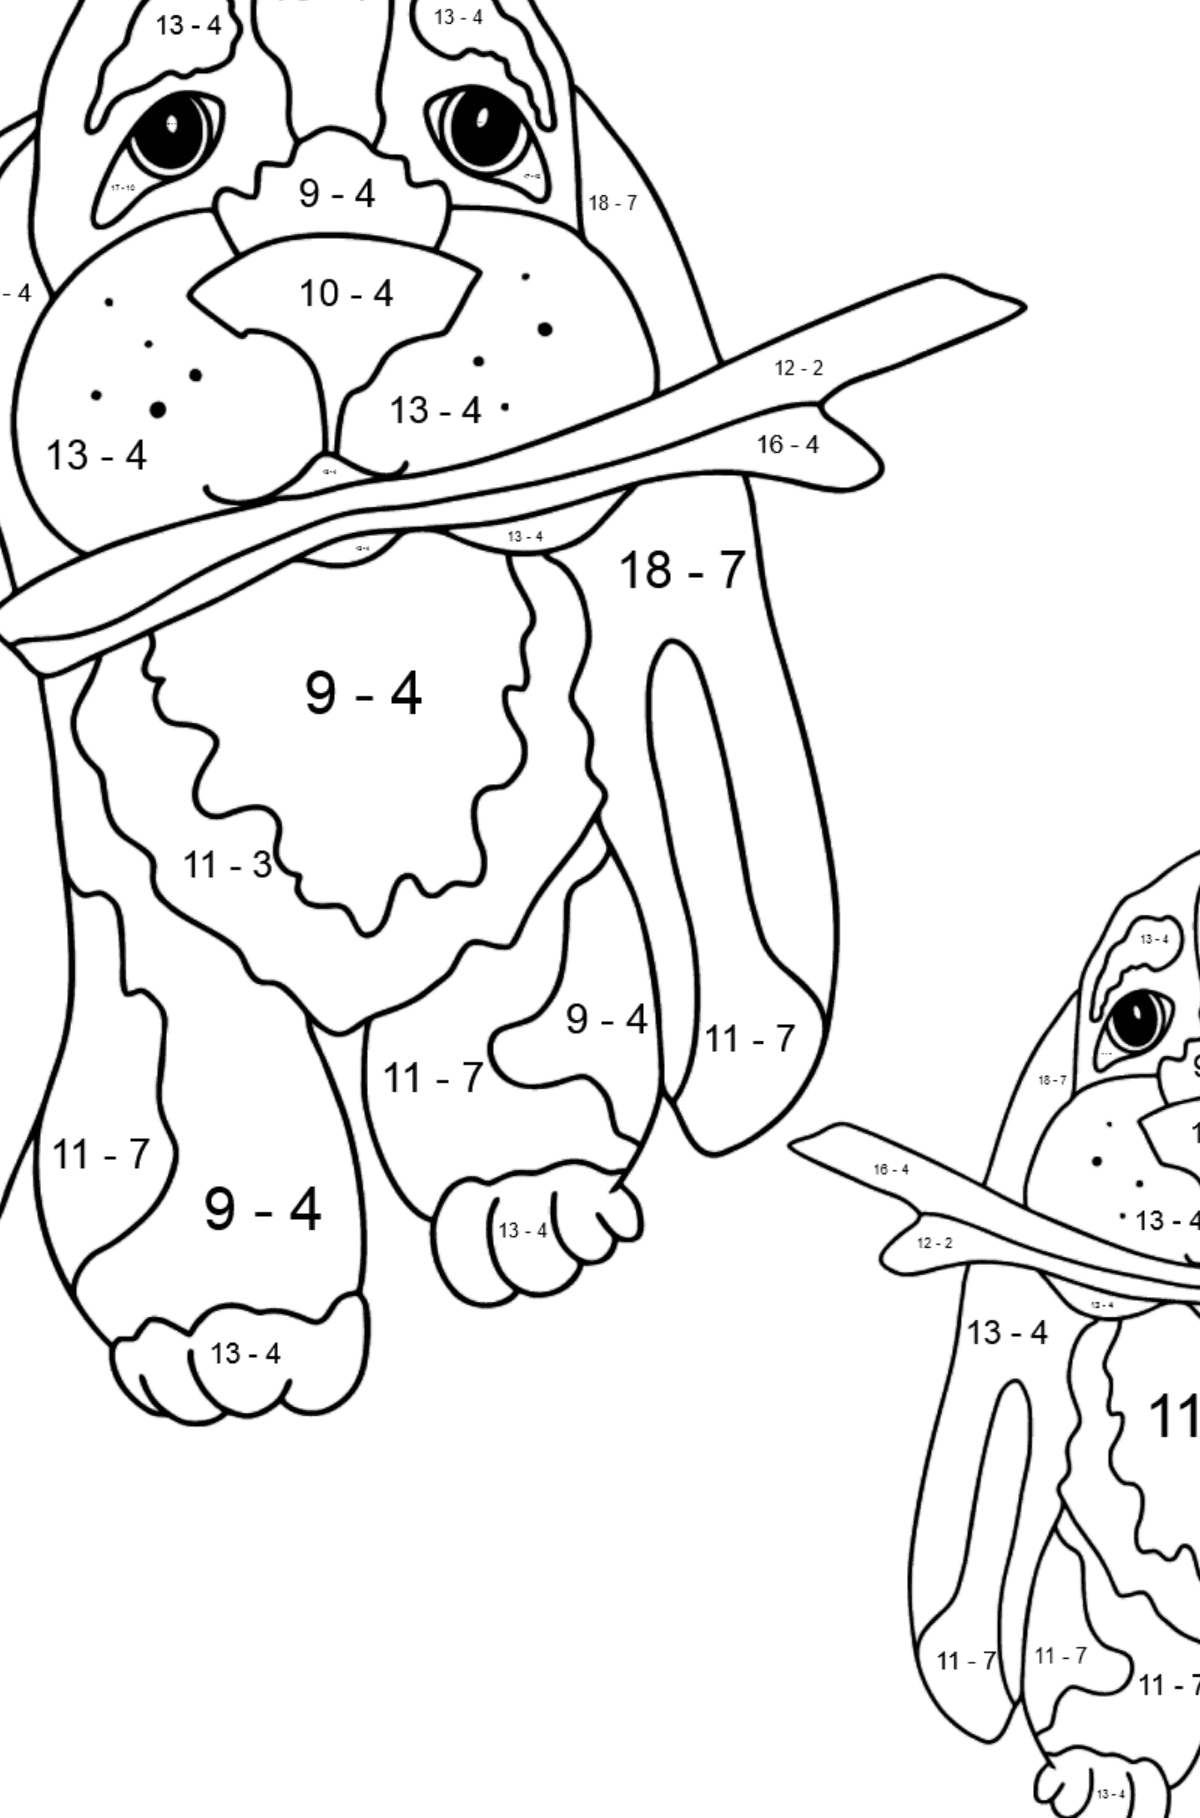 Coloring Page - Two Dogs are Playing with Sticks - Math Coloring - Subtraction for Kids